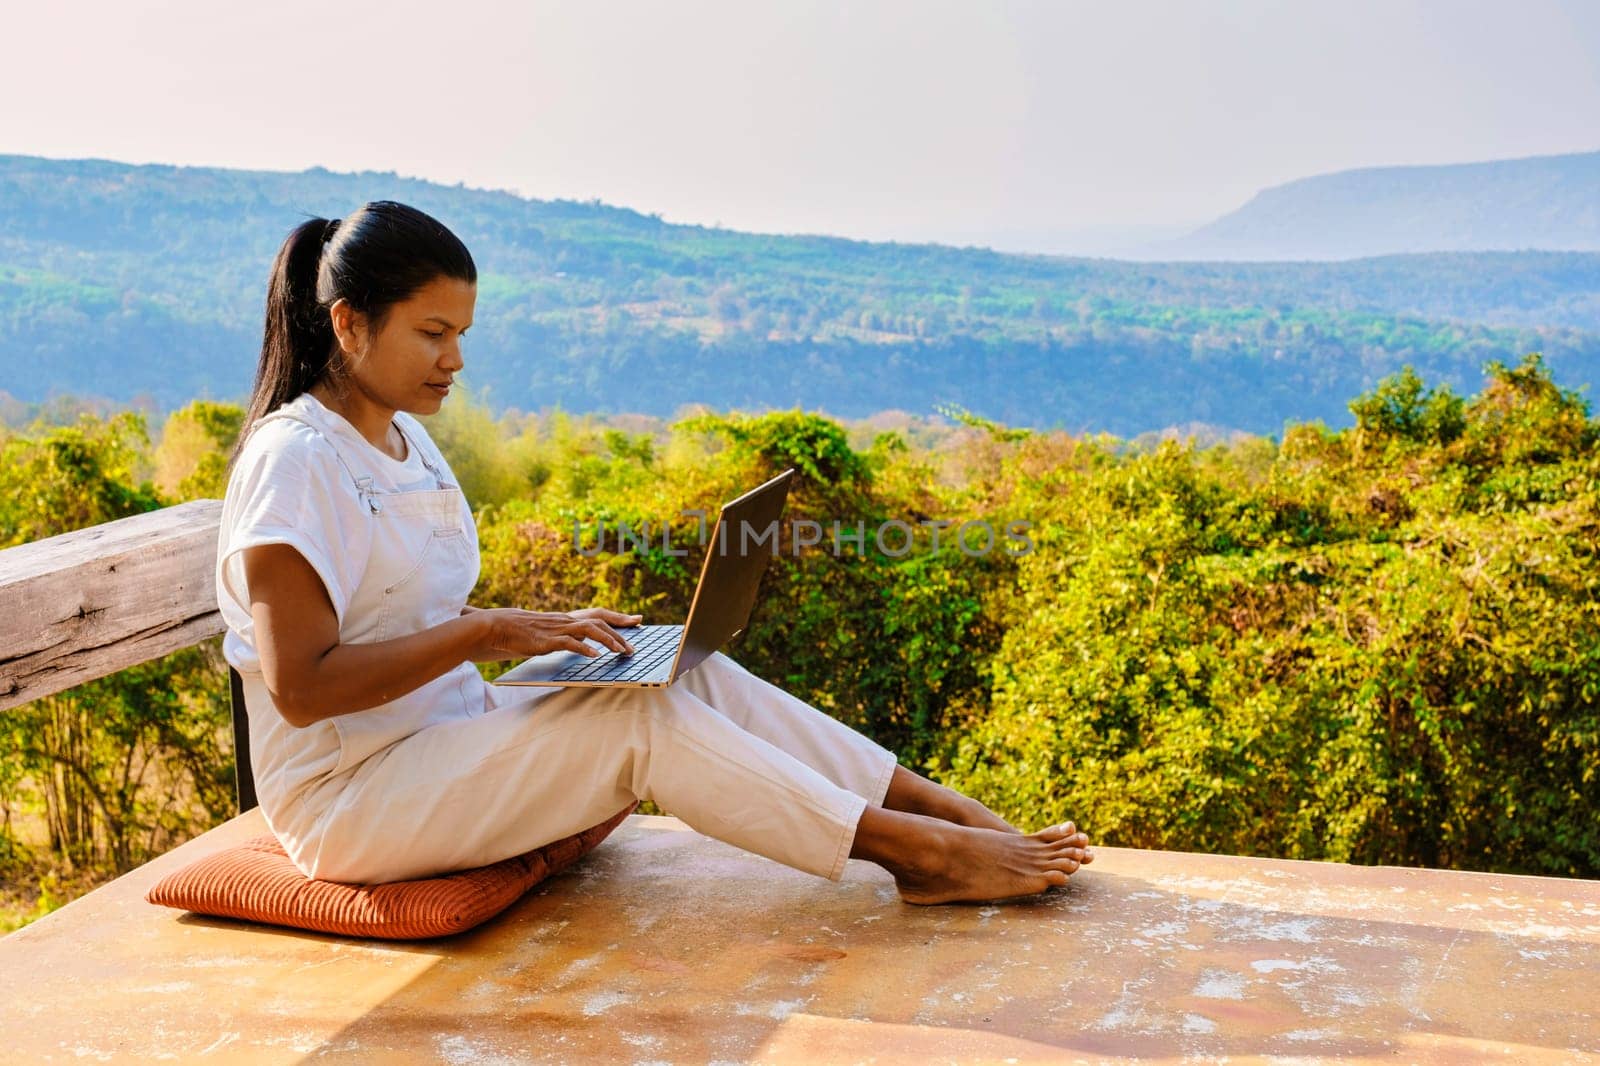 Young woman digital nomad traveler working online using a laptop and enjoying the beautiful natural landscape in front of a tent at sunrise. Digital nomad working on a laptop, remote working